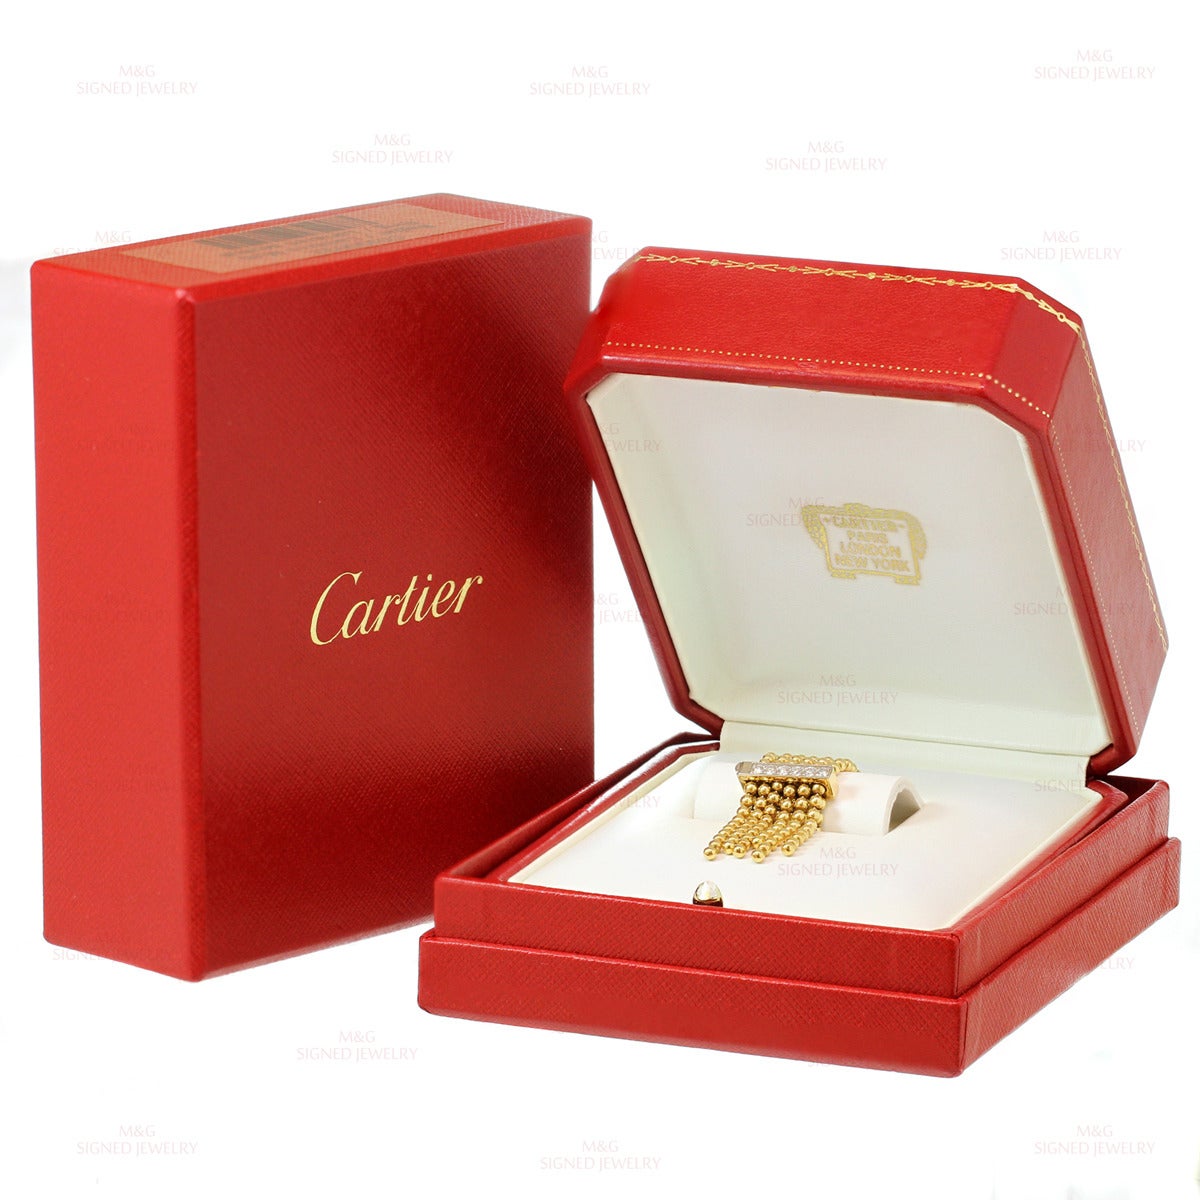 This stunning Cartier ring from the Paris Nouvelle Vague features an elegant beaded chain design crafted in 18k yellow gold and accented with round brilliant-cut diamonds of an estimated 0.30 carats. Size is adjustable. Made in France circa 2000s.